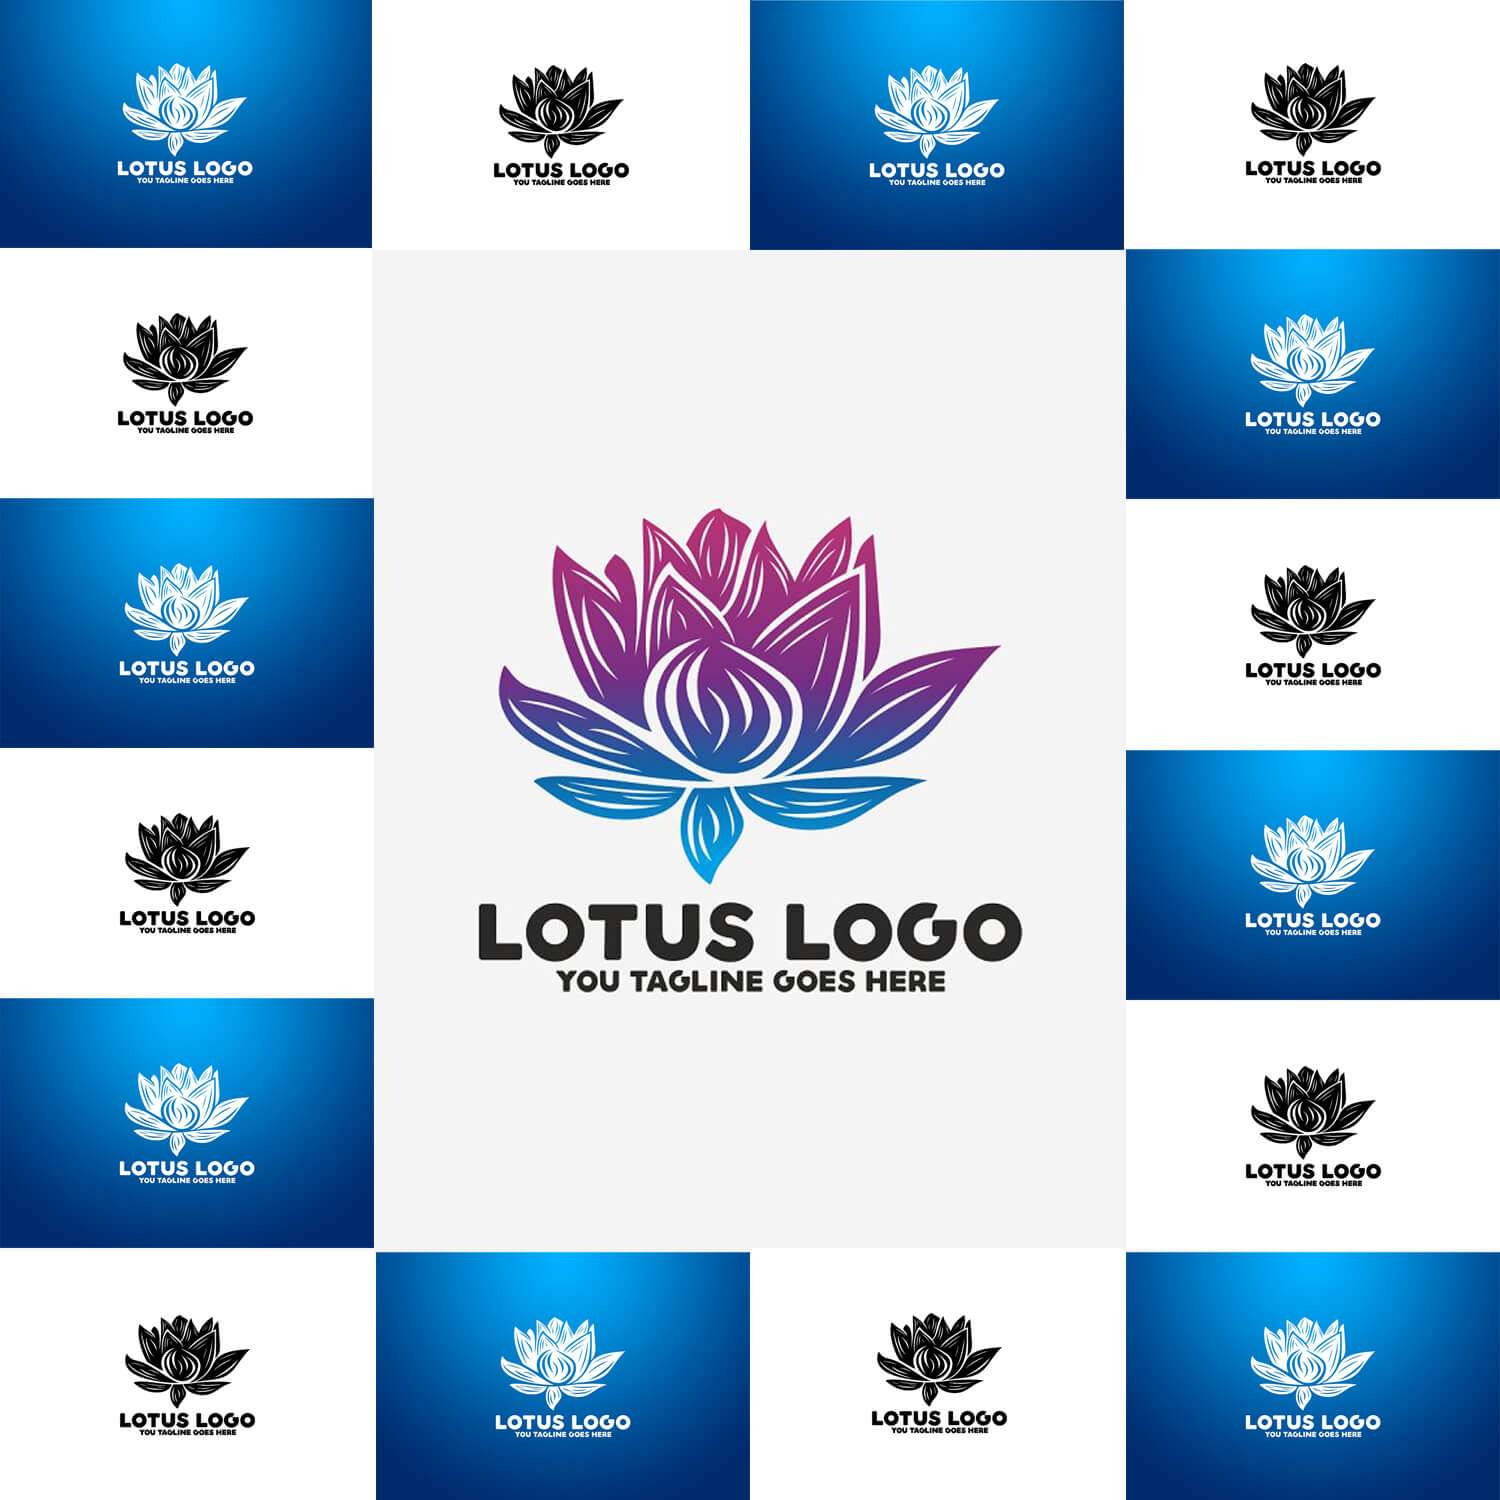 White and blue, violet and blue and black and white Lotus logo, many small ones along the edge of the picture and a large one in the center.